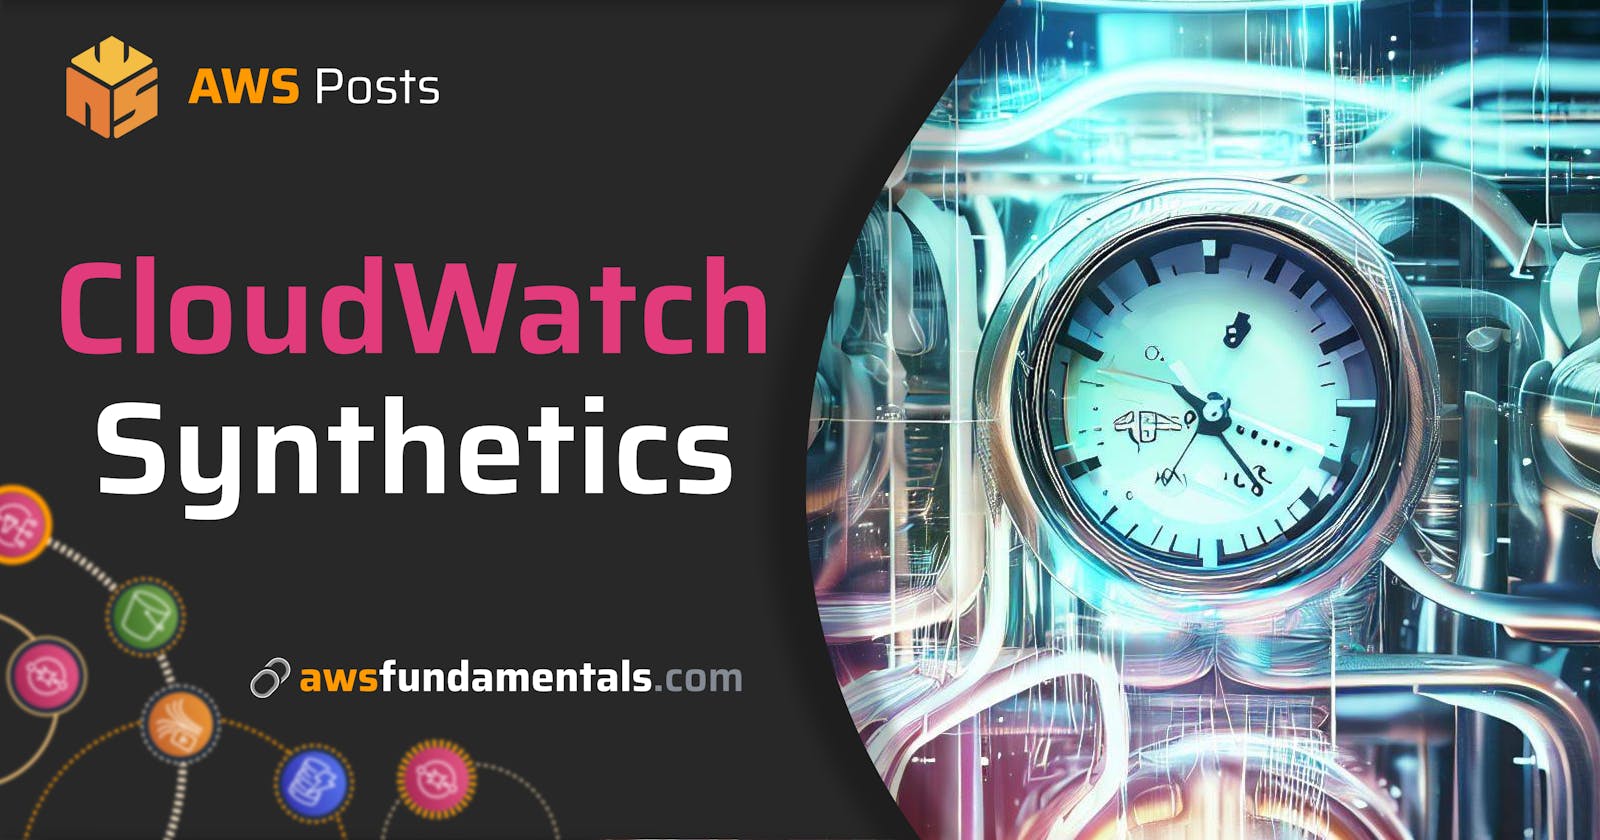 Use CloudWatch Synthetics to Monitor Your Web Application